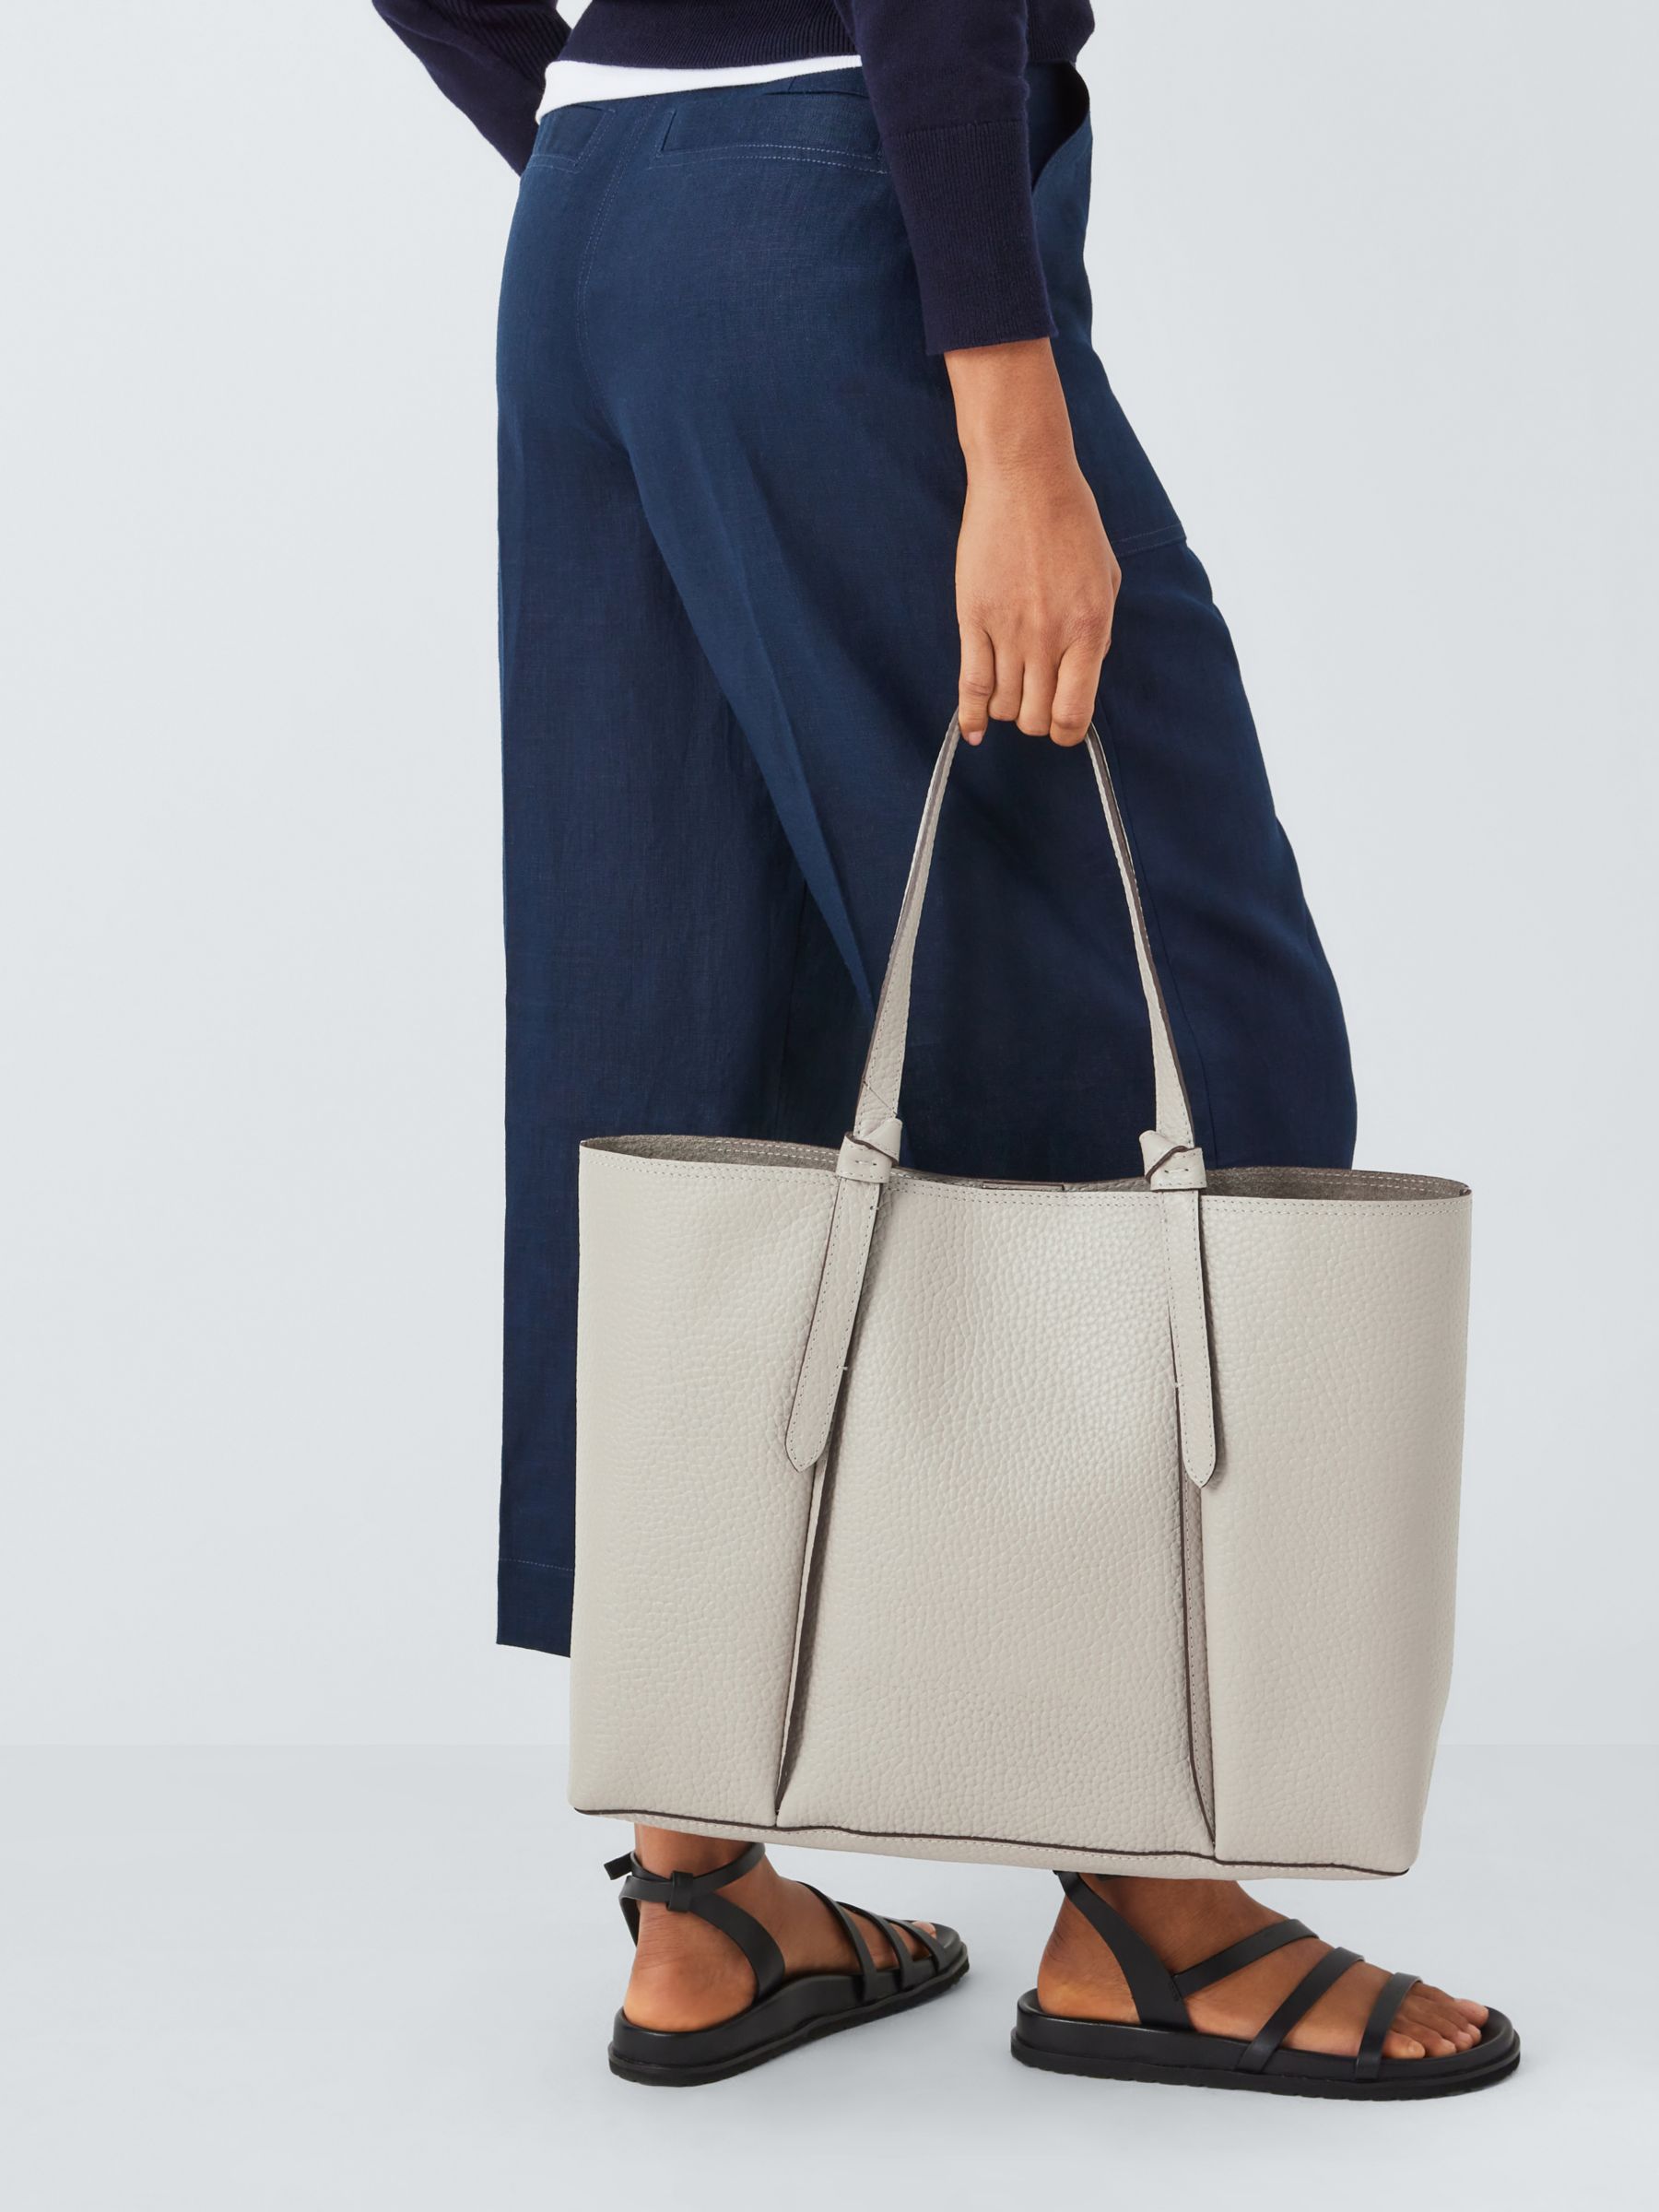 John Lewis Knot Handle Leather Tote Bag, Porpoise at John Lewis & Partners